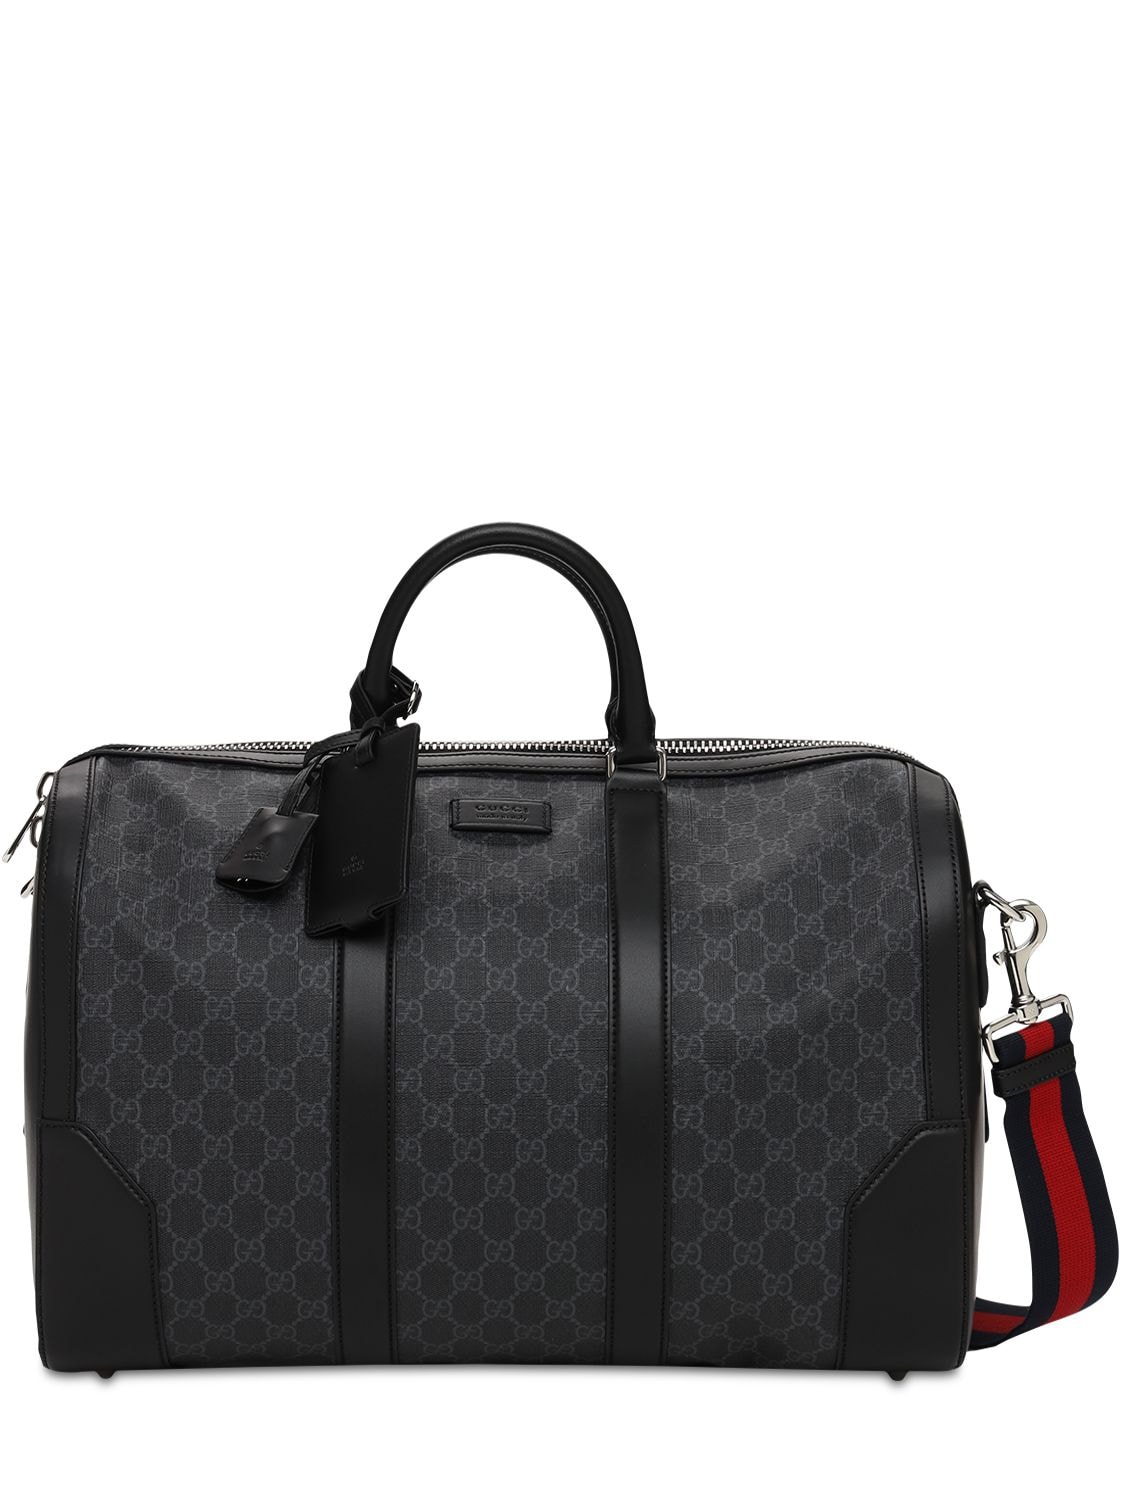 Gucci Gg Supreme Coated Canvas Carry-on Bag In Black